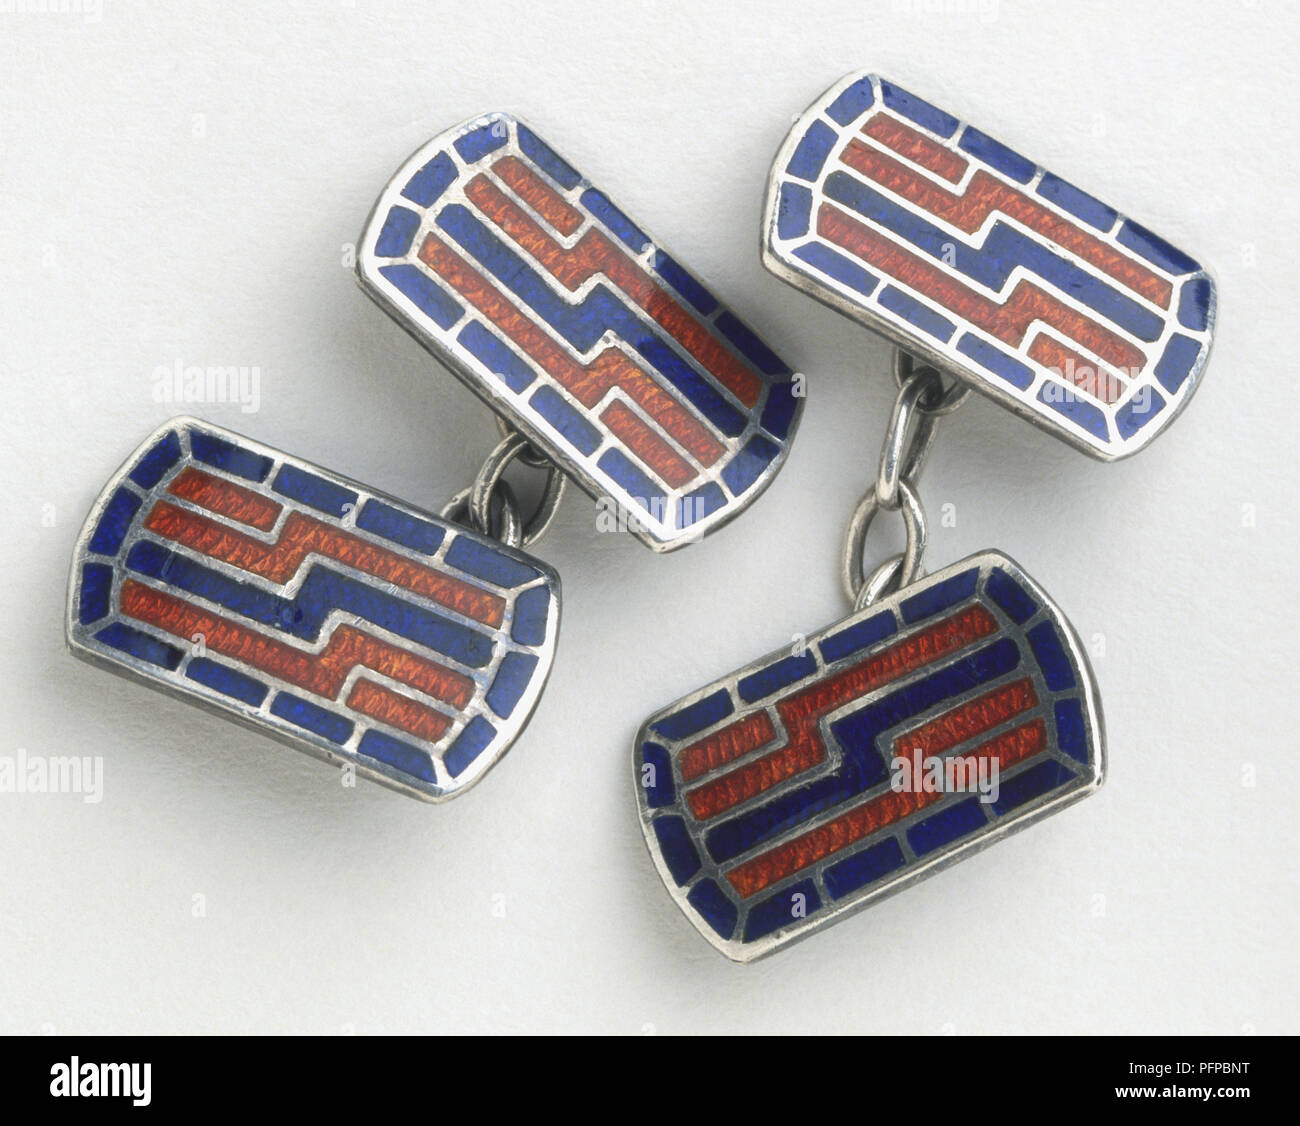 Pair of cufflinks in a blue and red geometric design Stock Photo